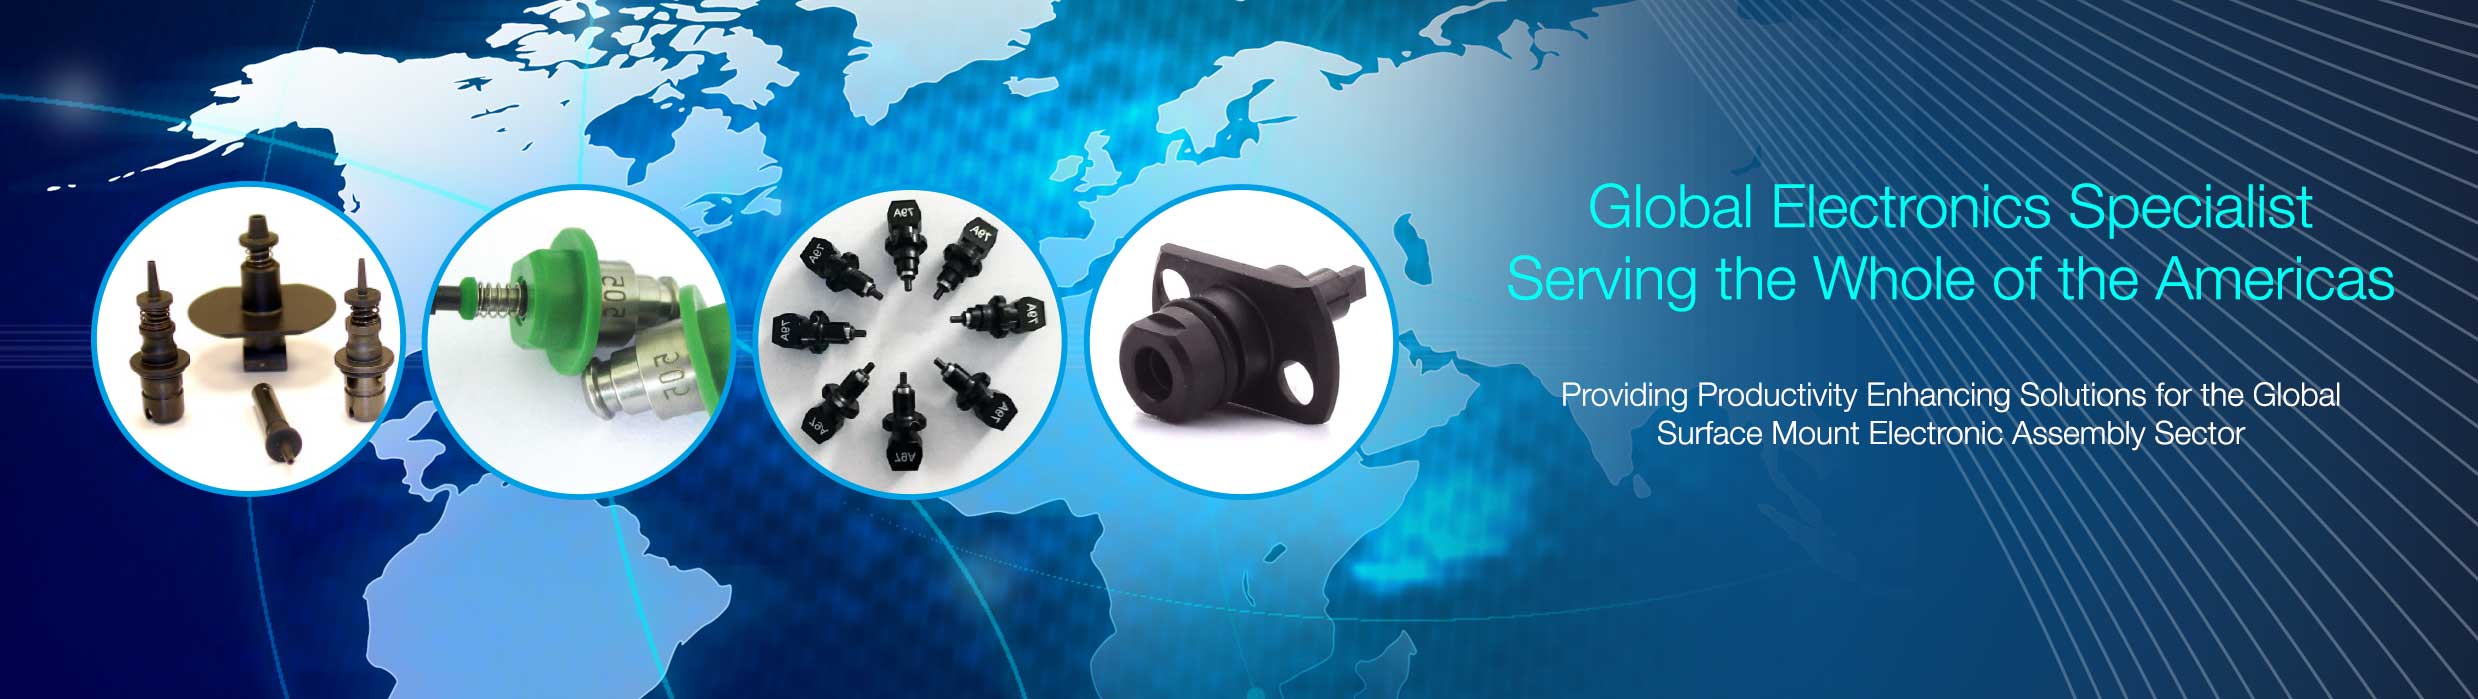 Providing productivity enhancing solutions for the global surface mount electronic assembly sector